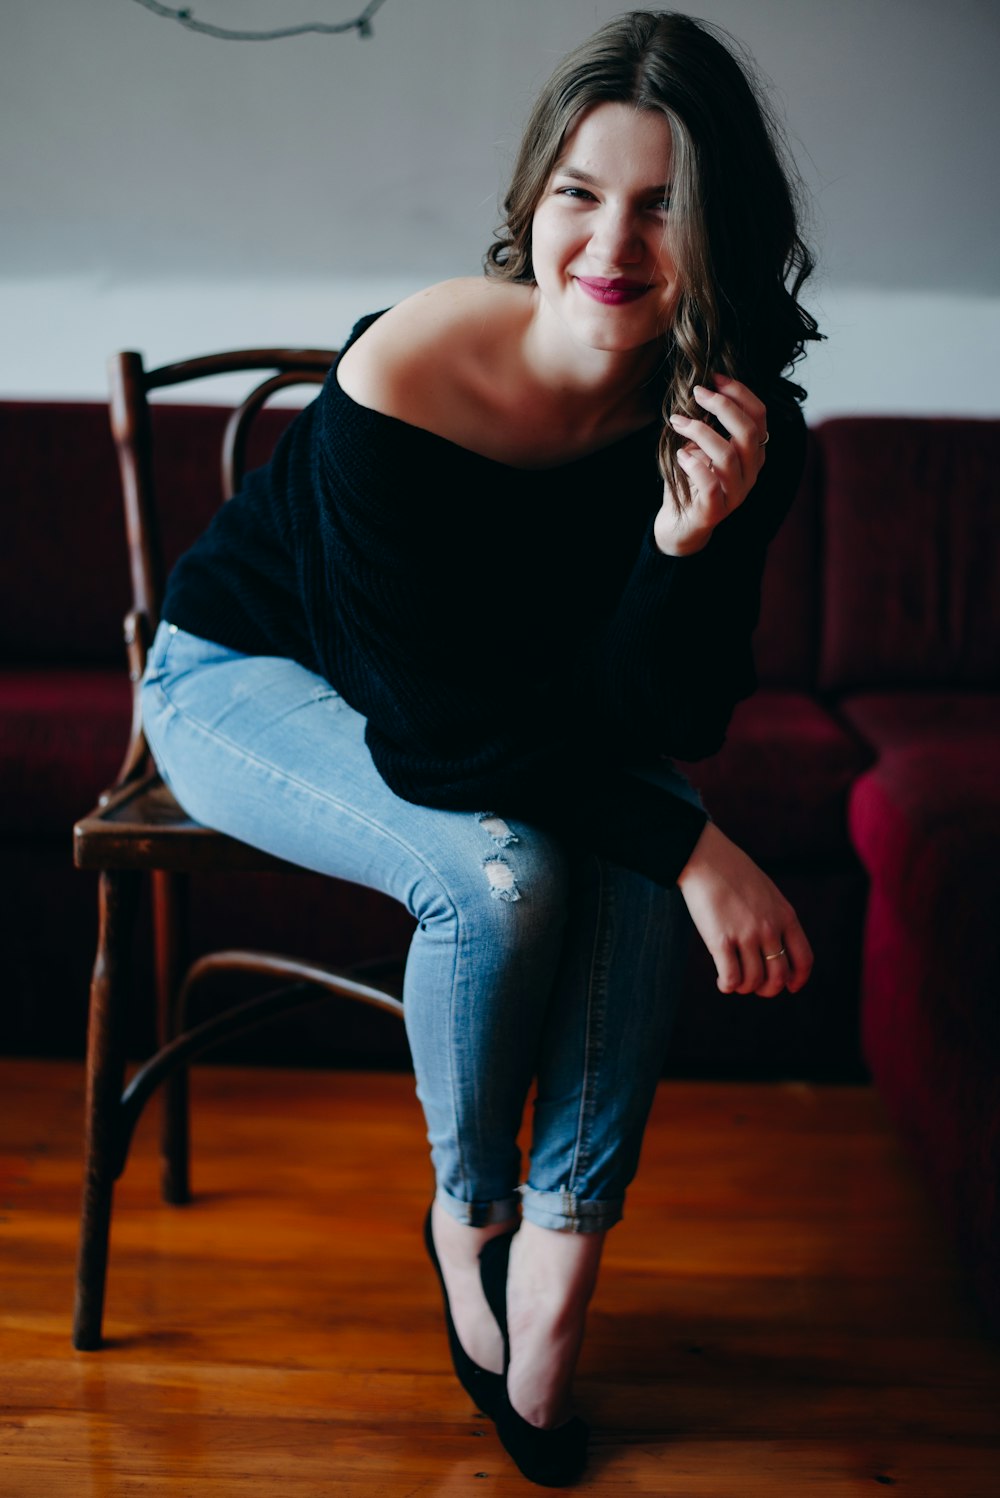 smiling woman wearing black off-shoulder long sleeved shirt with blue denim jeans sitting on chair